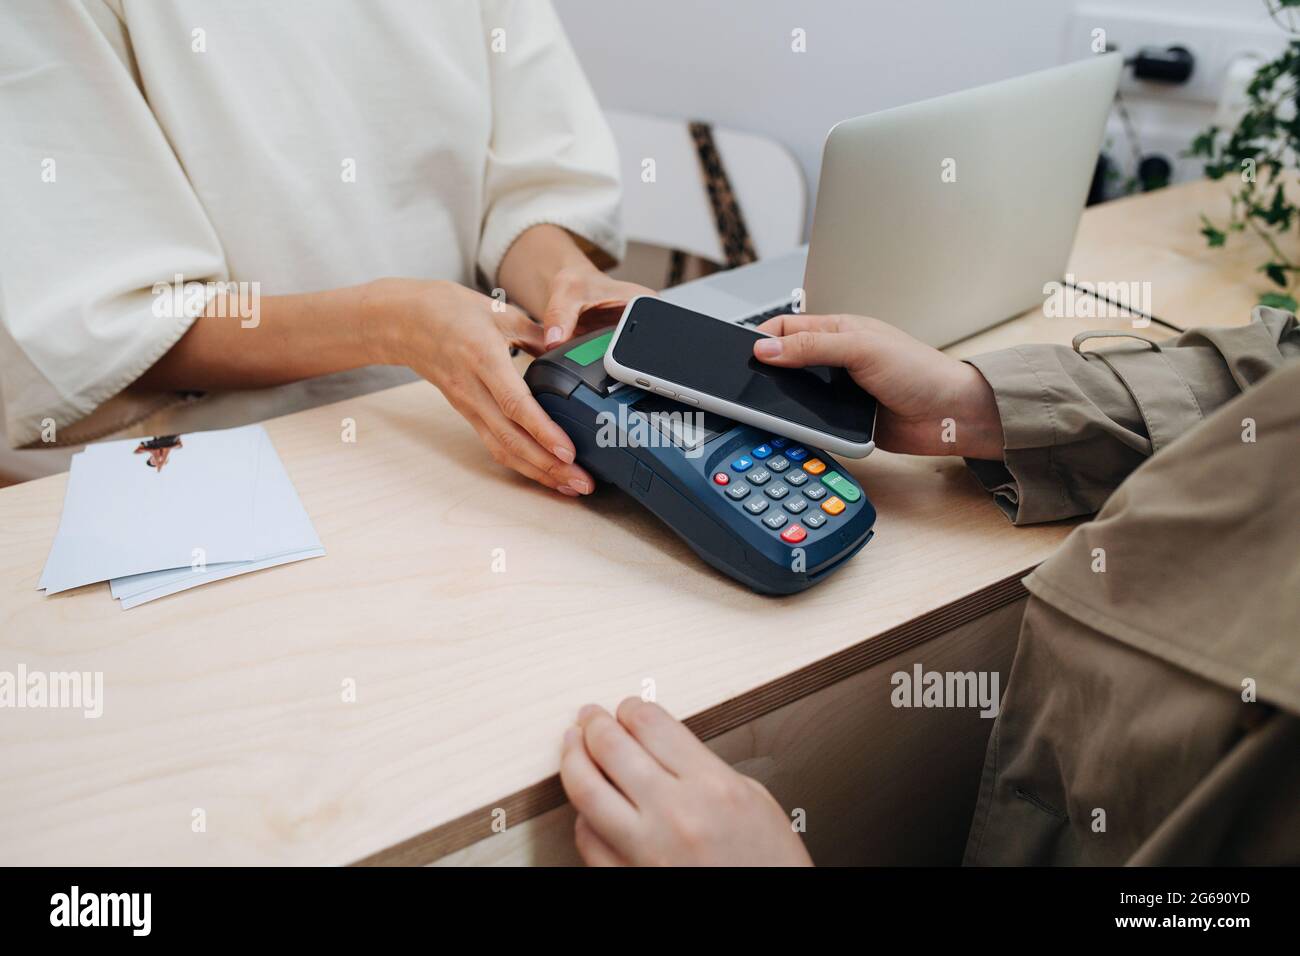 Woman paying with her phone on a cash terminal. Hands only. Seller holding it with both hands. Stock Photo